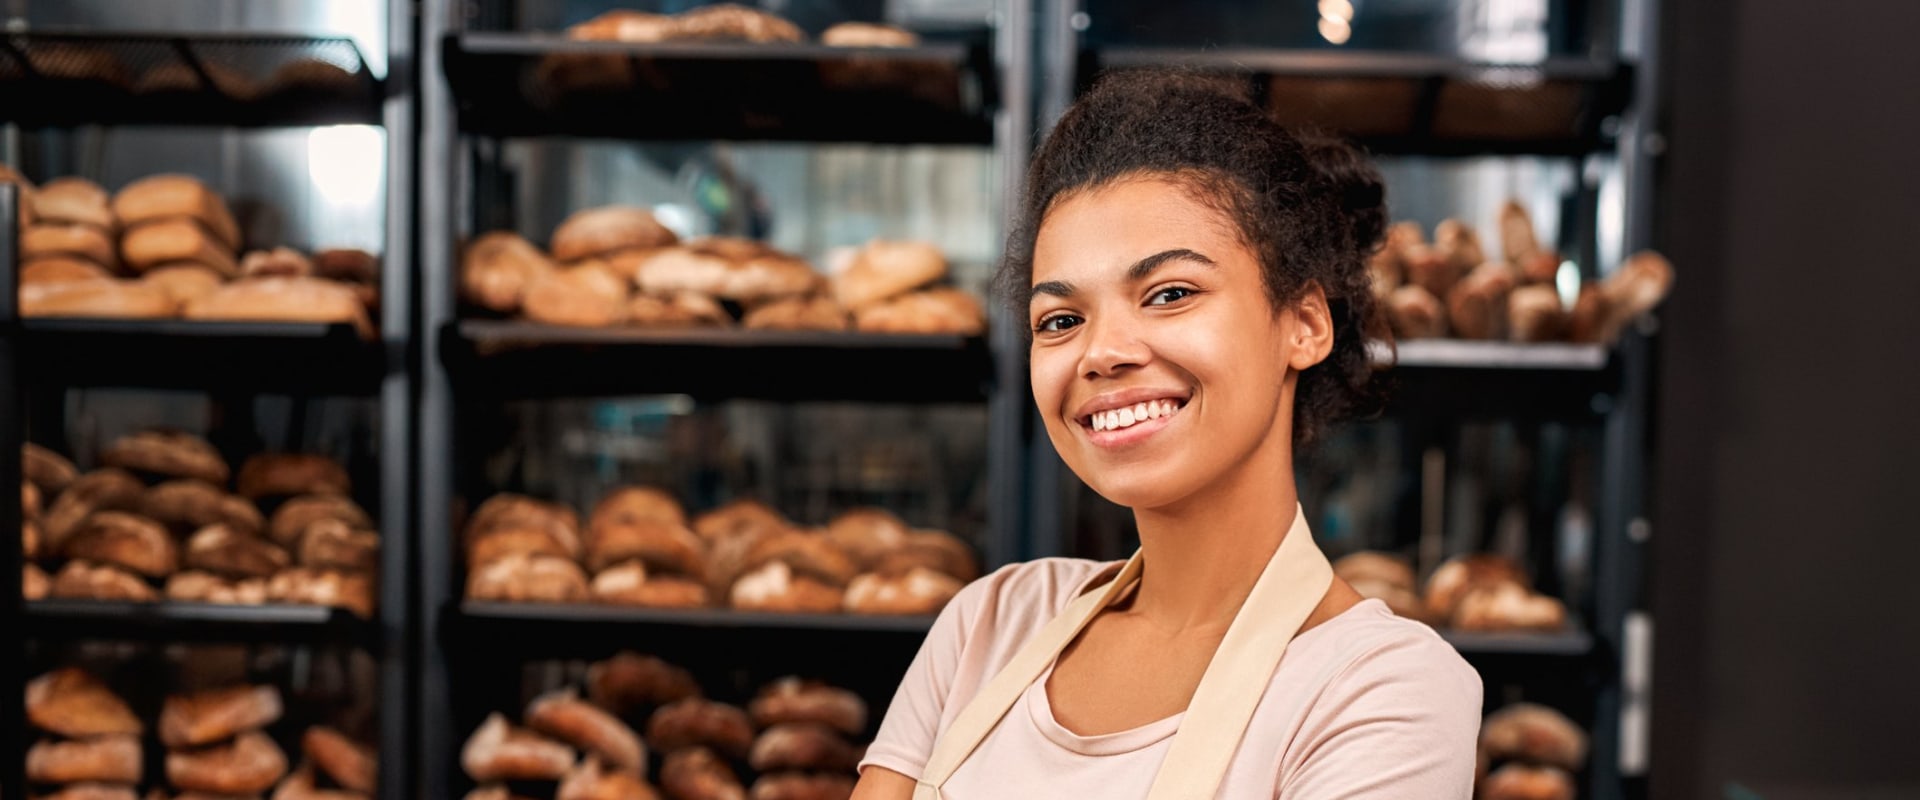 Types of Small Businesses: 5 Examples and Benefits